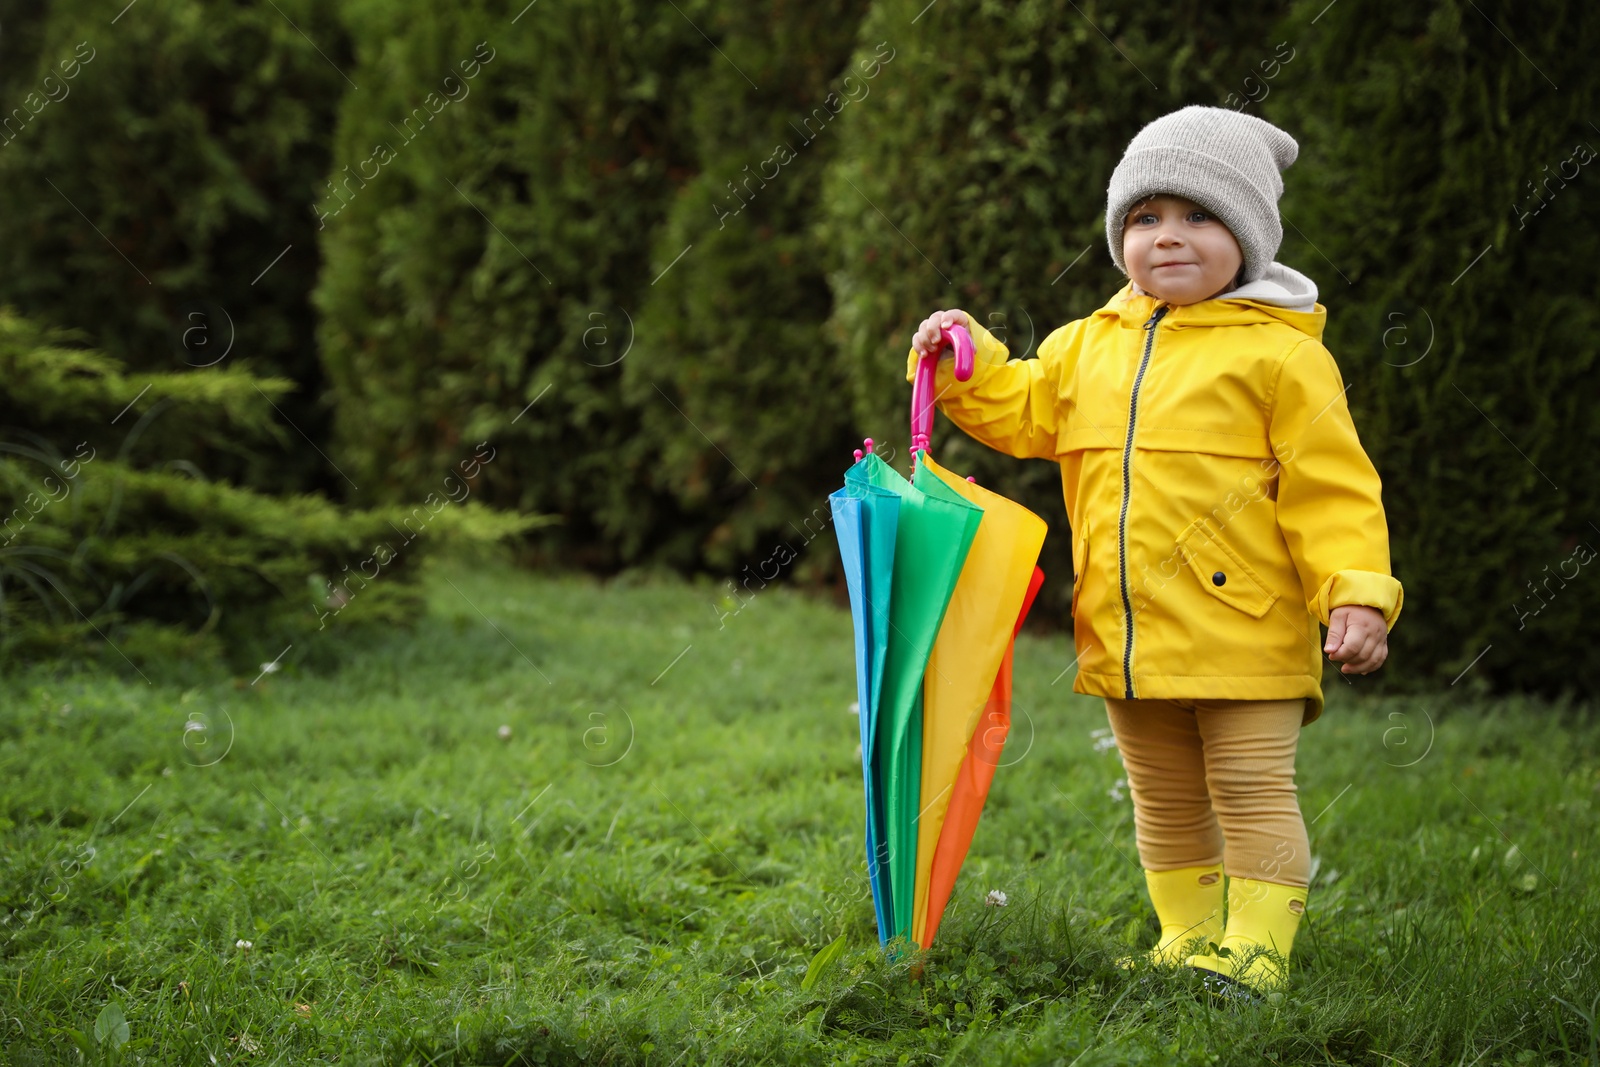 Photo of Cute little girl holding colorful umbrella in garden, space for text